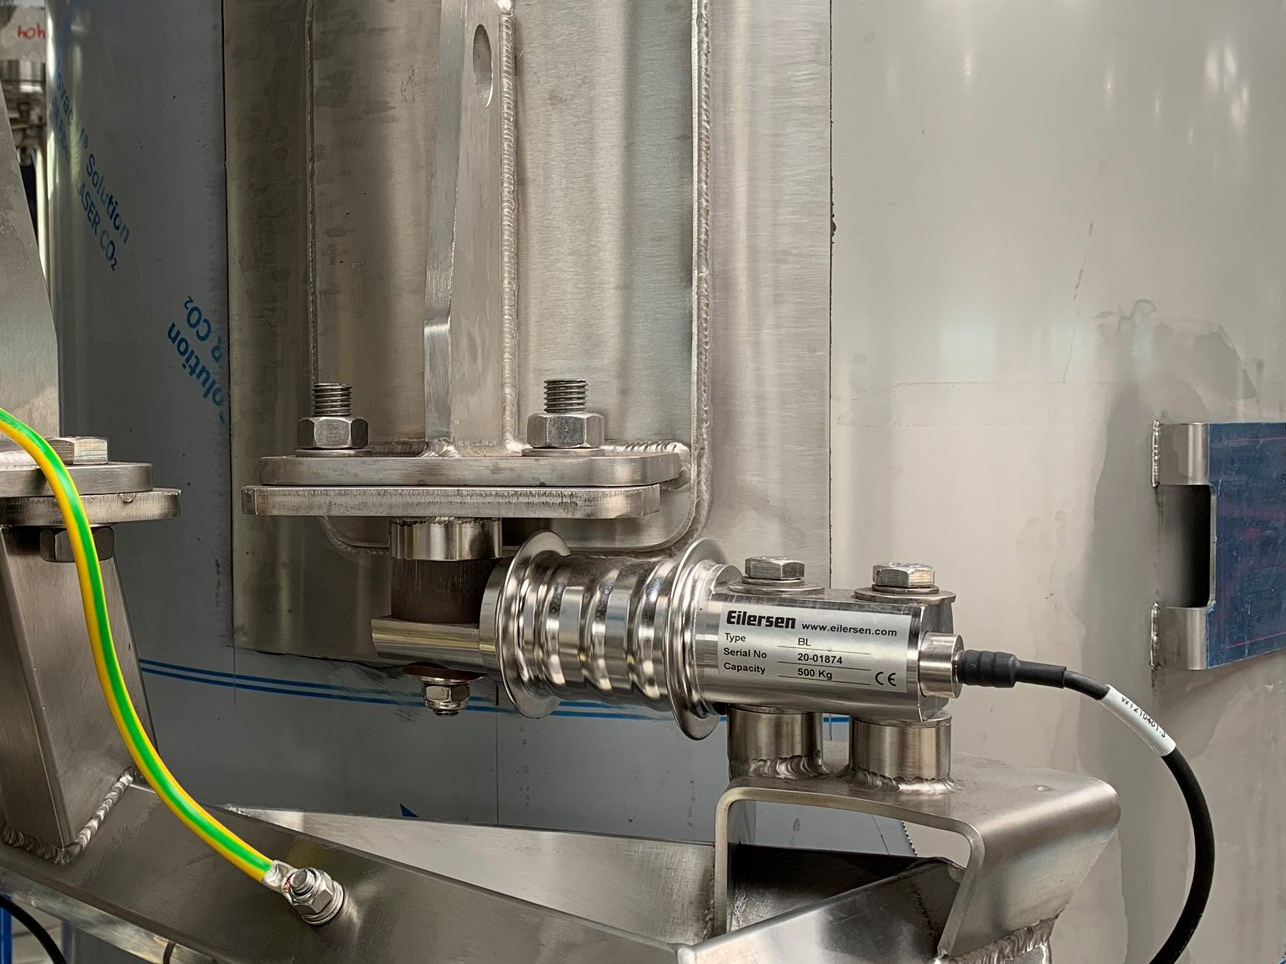 Digital Beam Load Cell Mounted on Hopper. Hygienic Load Cells for the Food Industry.